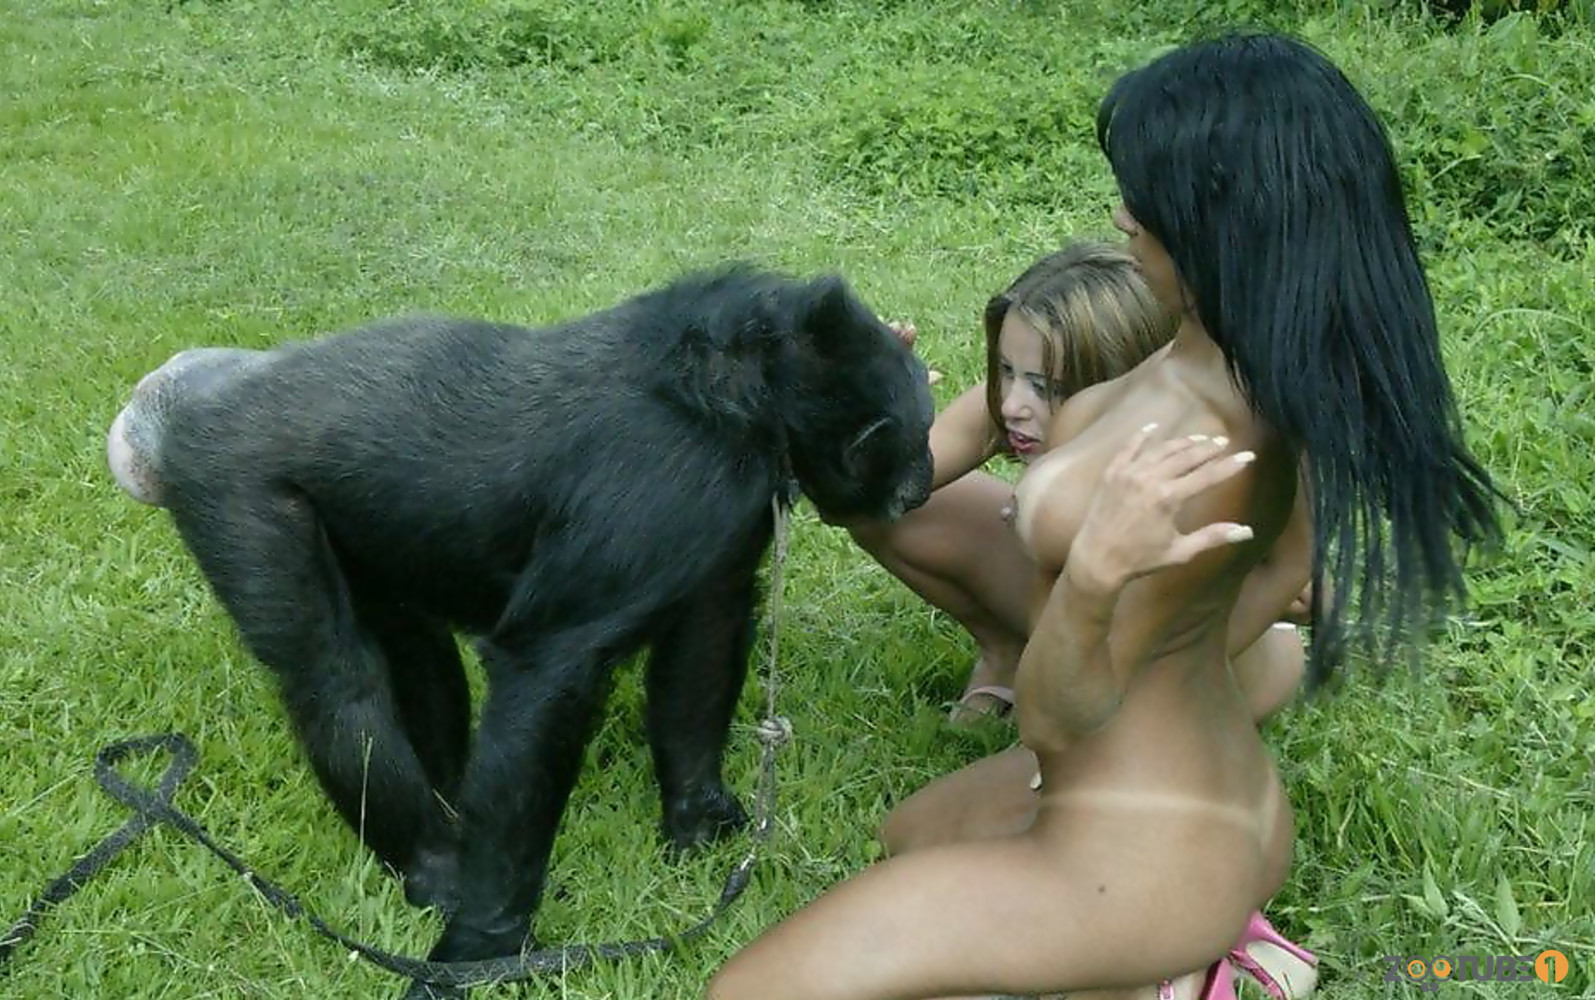 Sex With Monkey.